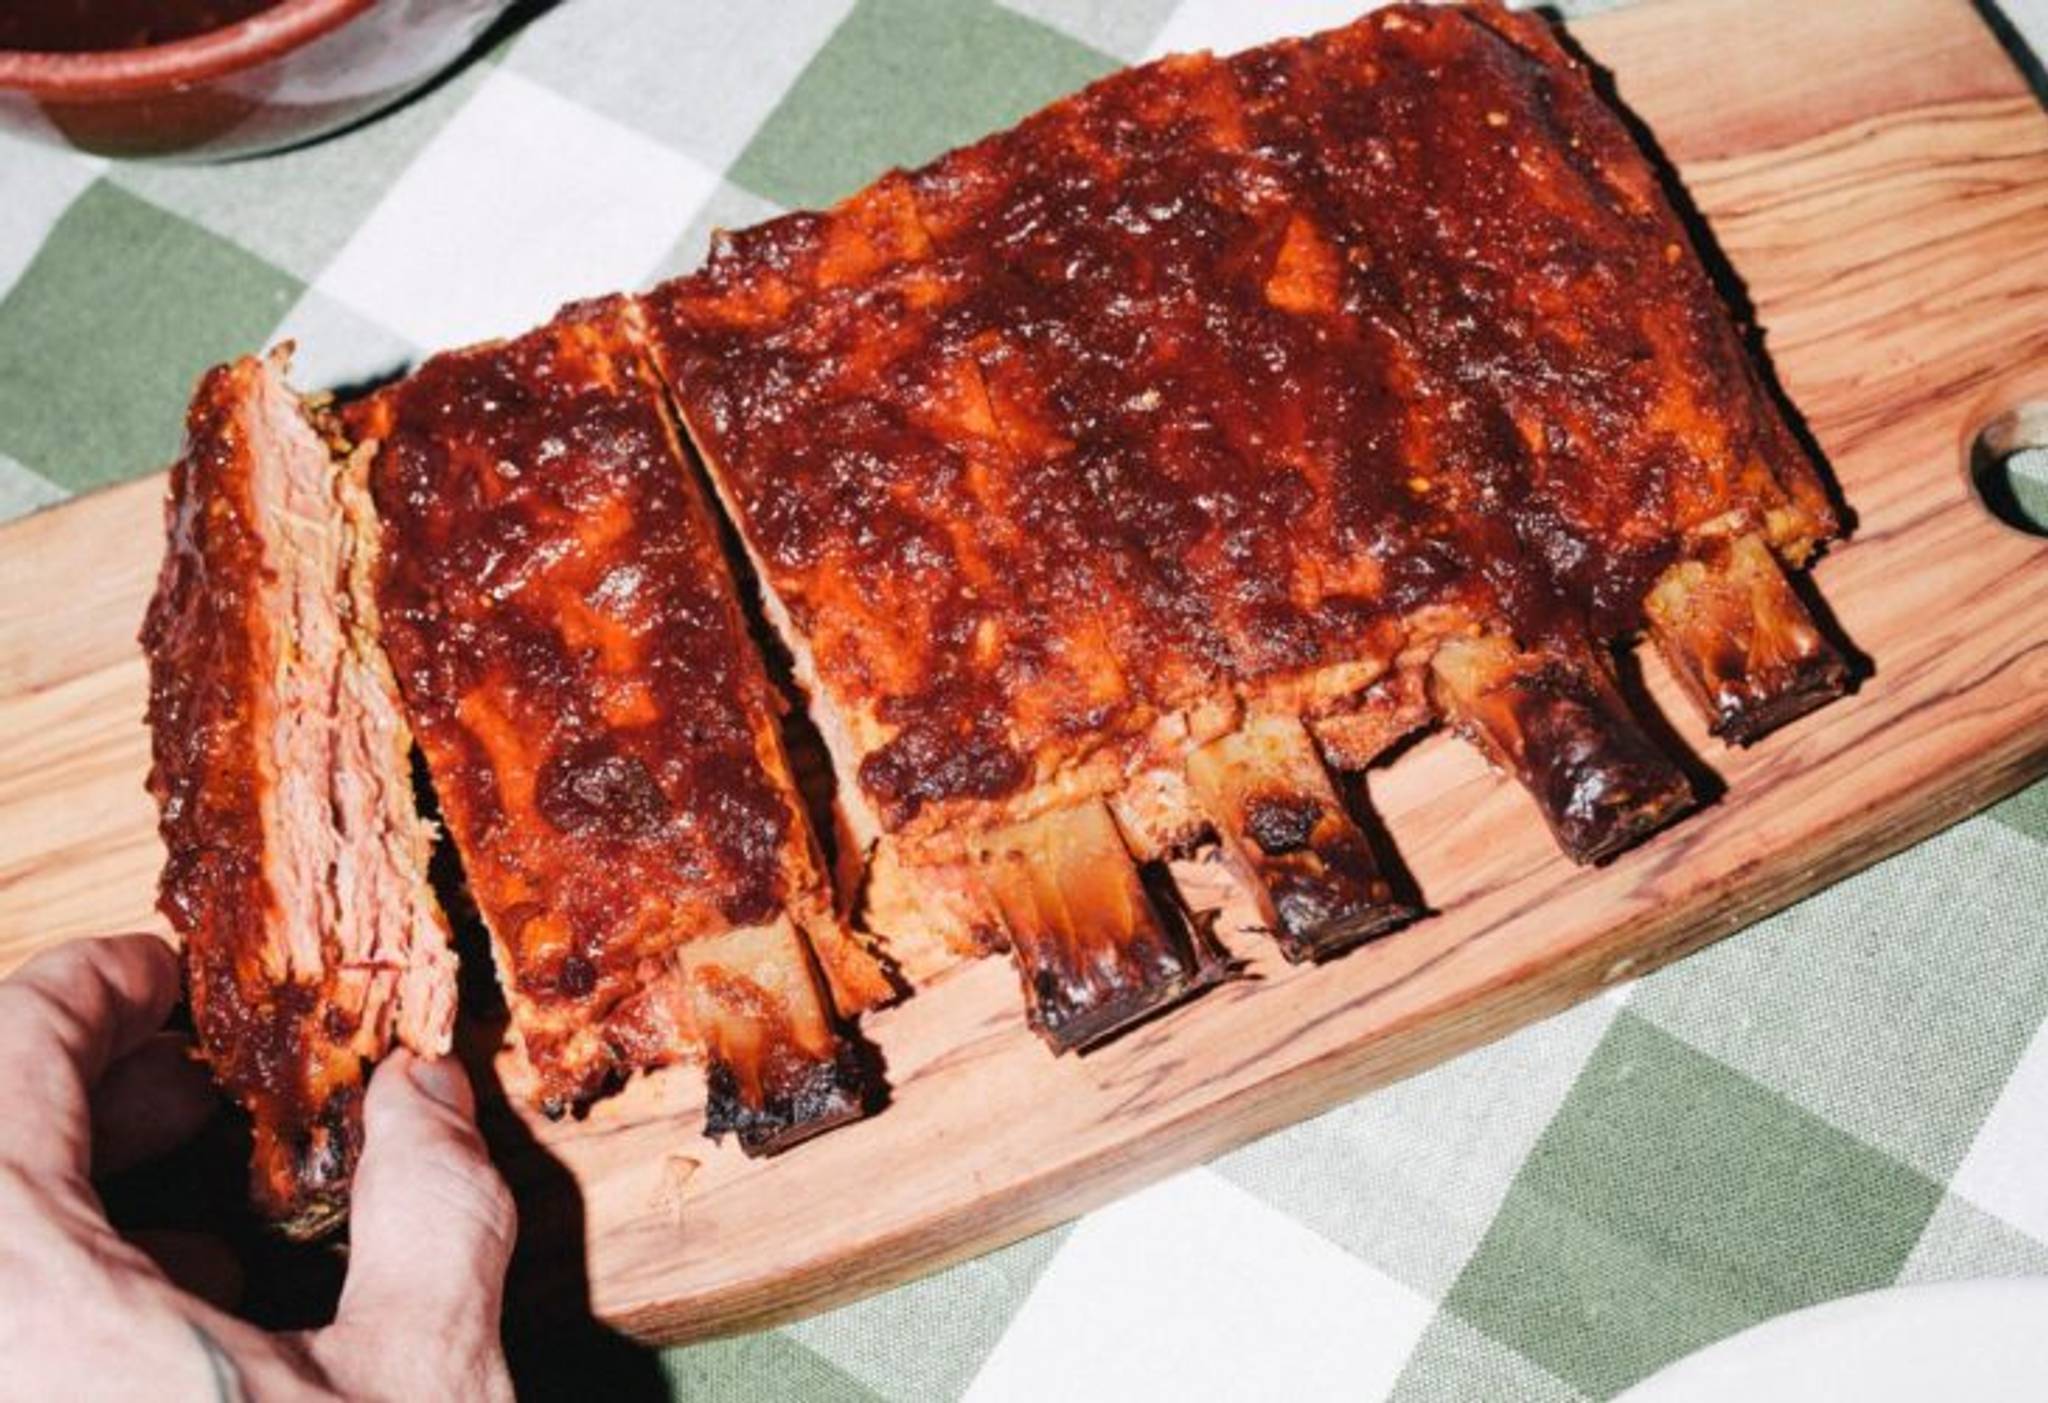 Juicy marbles introduces plant-based bone-in ribs